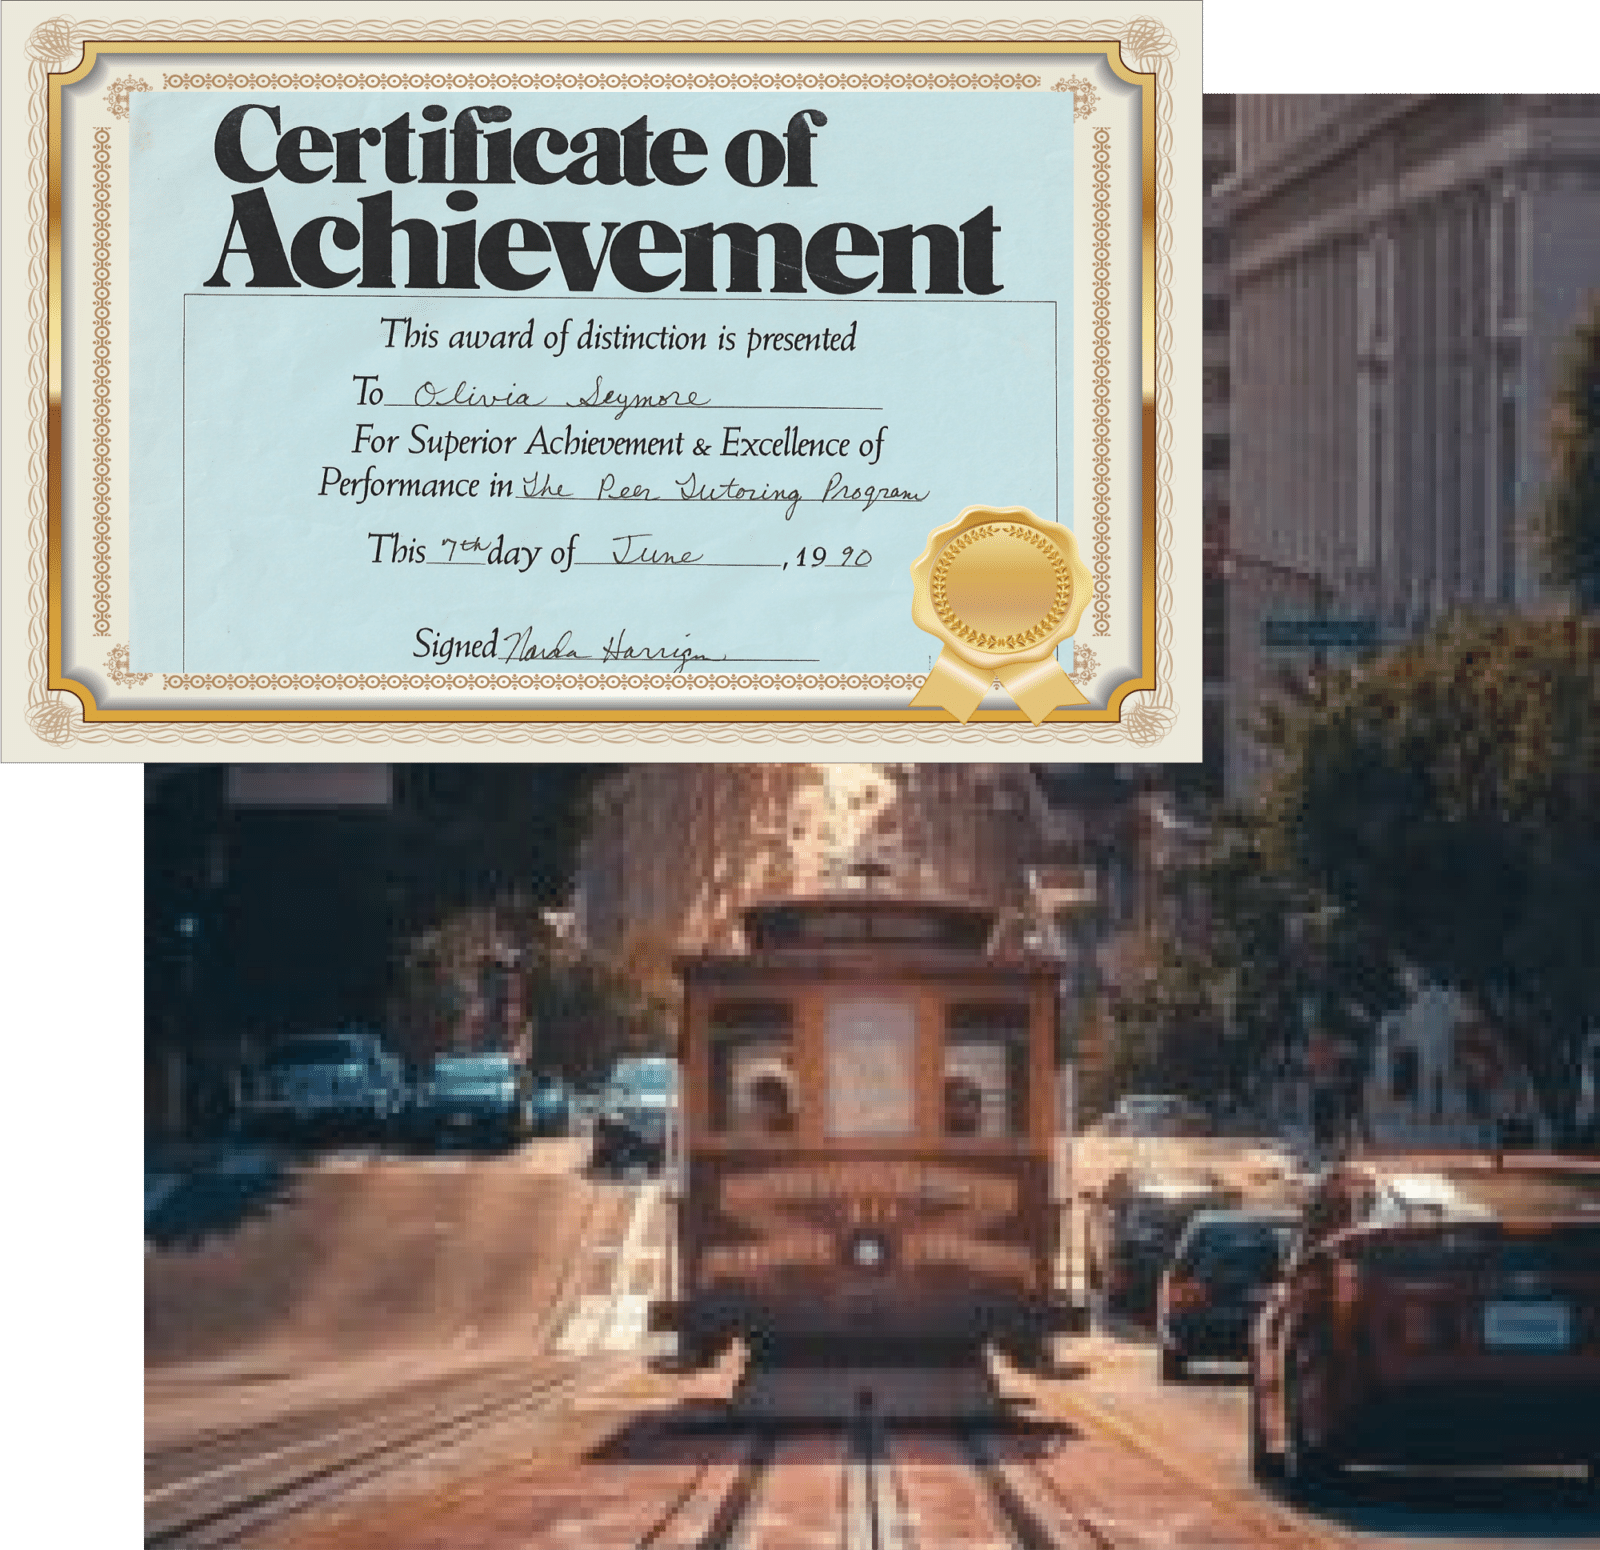 Certificate of Achievement of Olivia from 1990